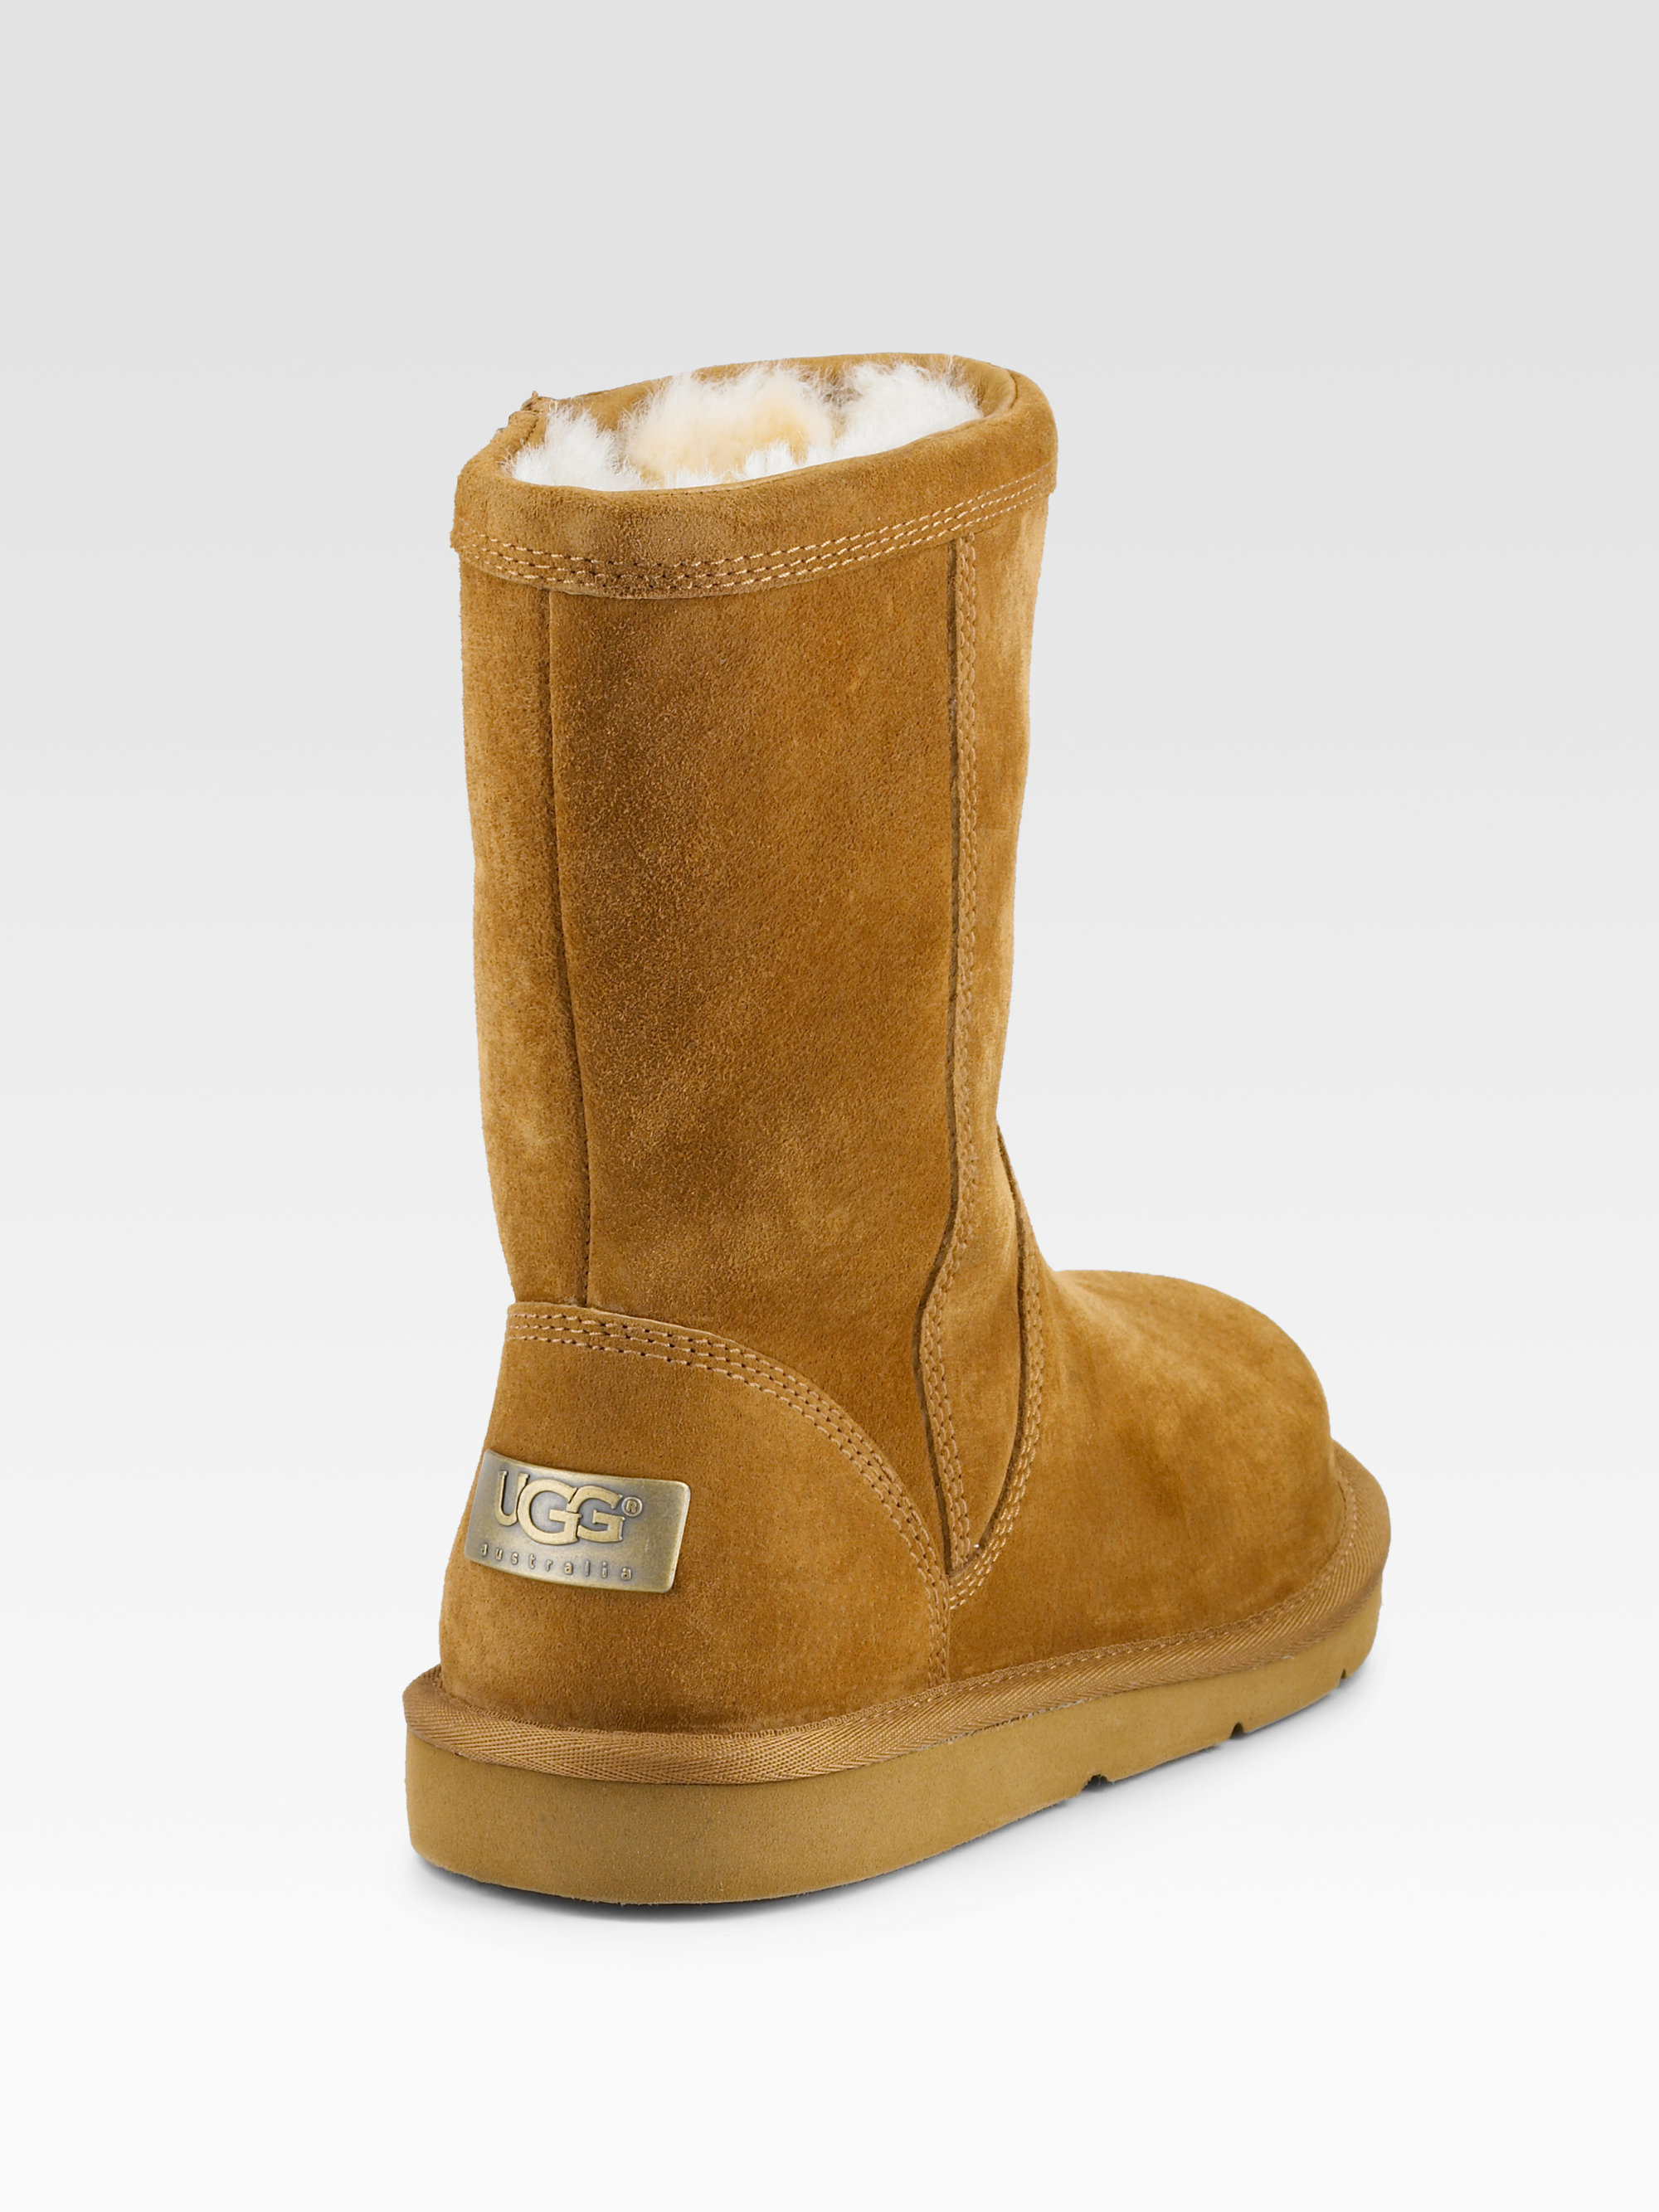 black ugg boots with zipper